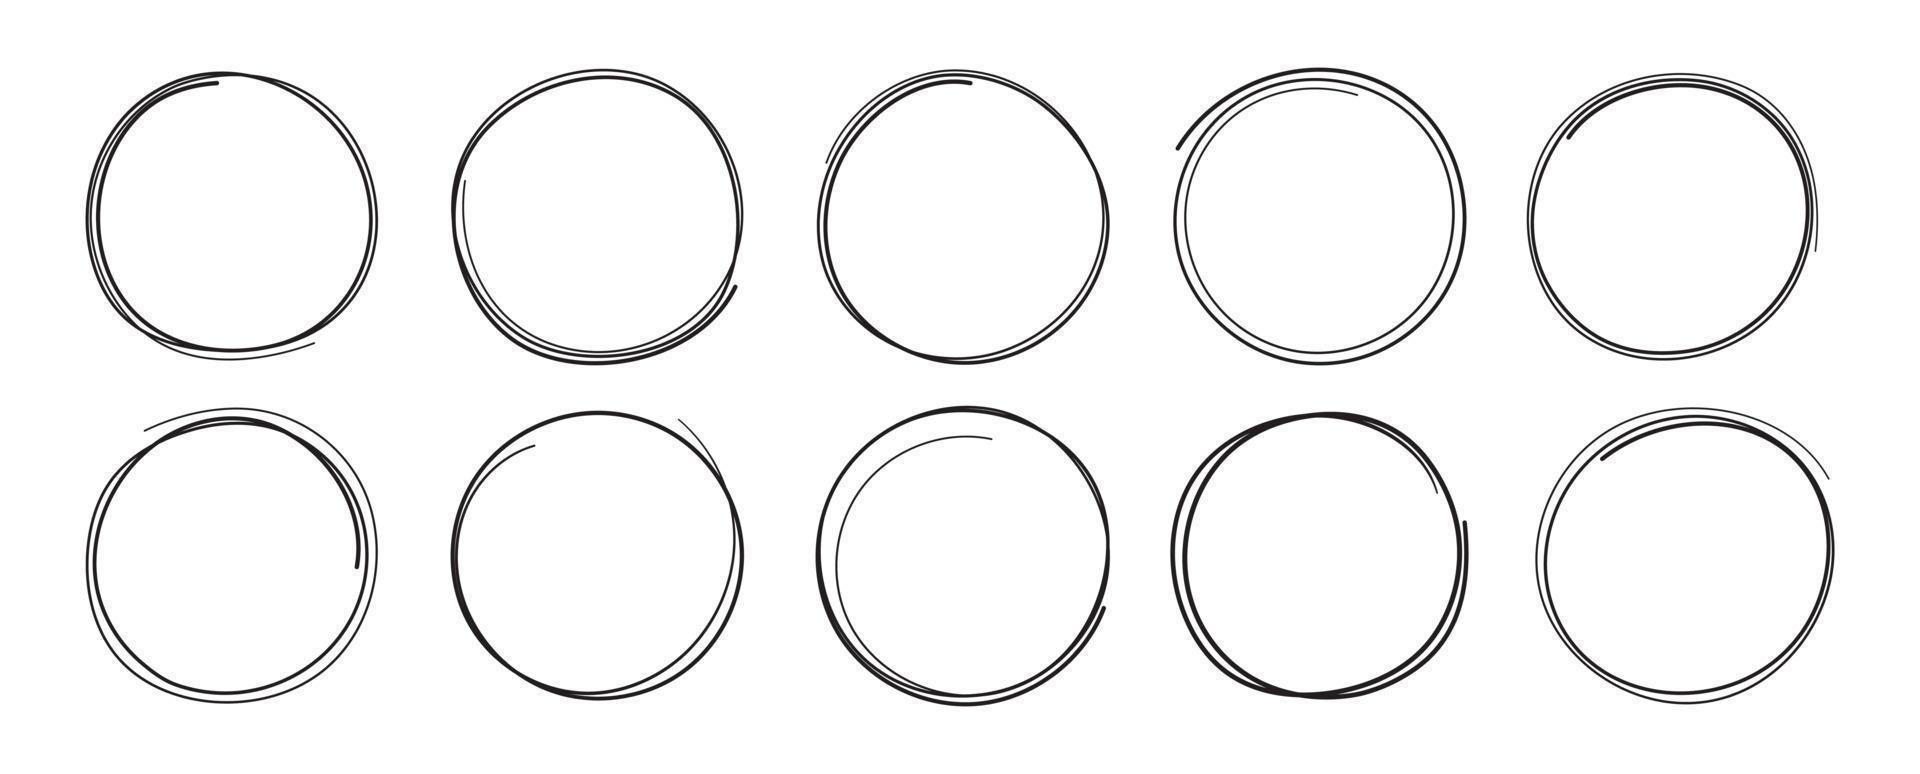 8 hand drawn scribble circles set isolated on transparent background vector